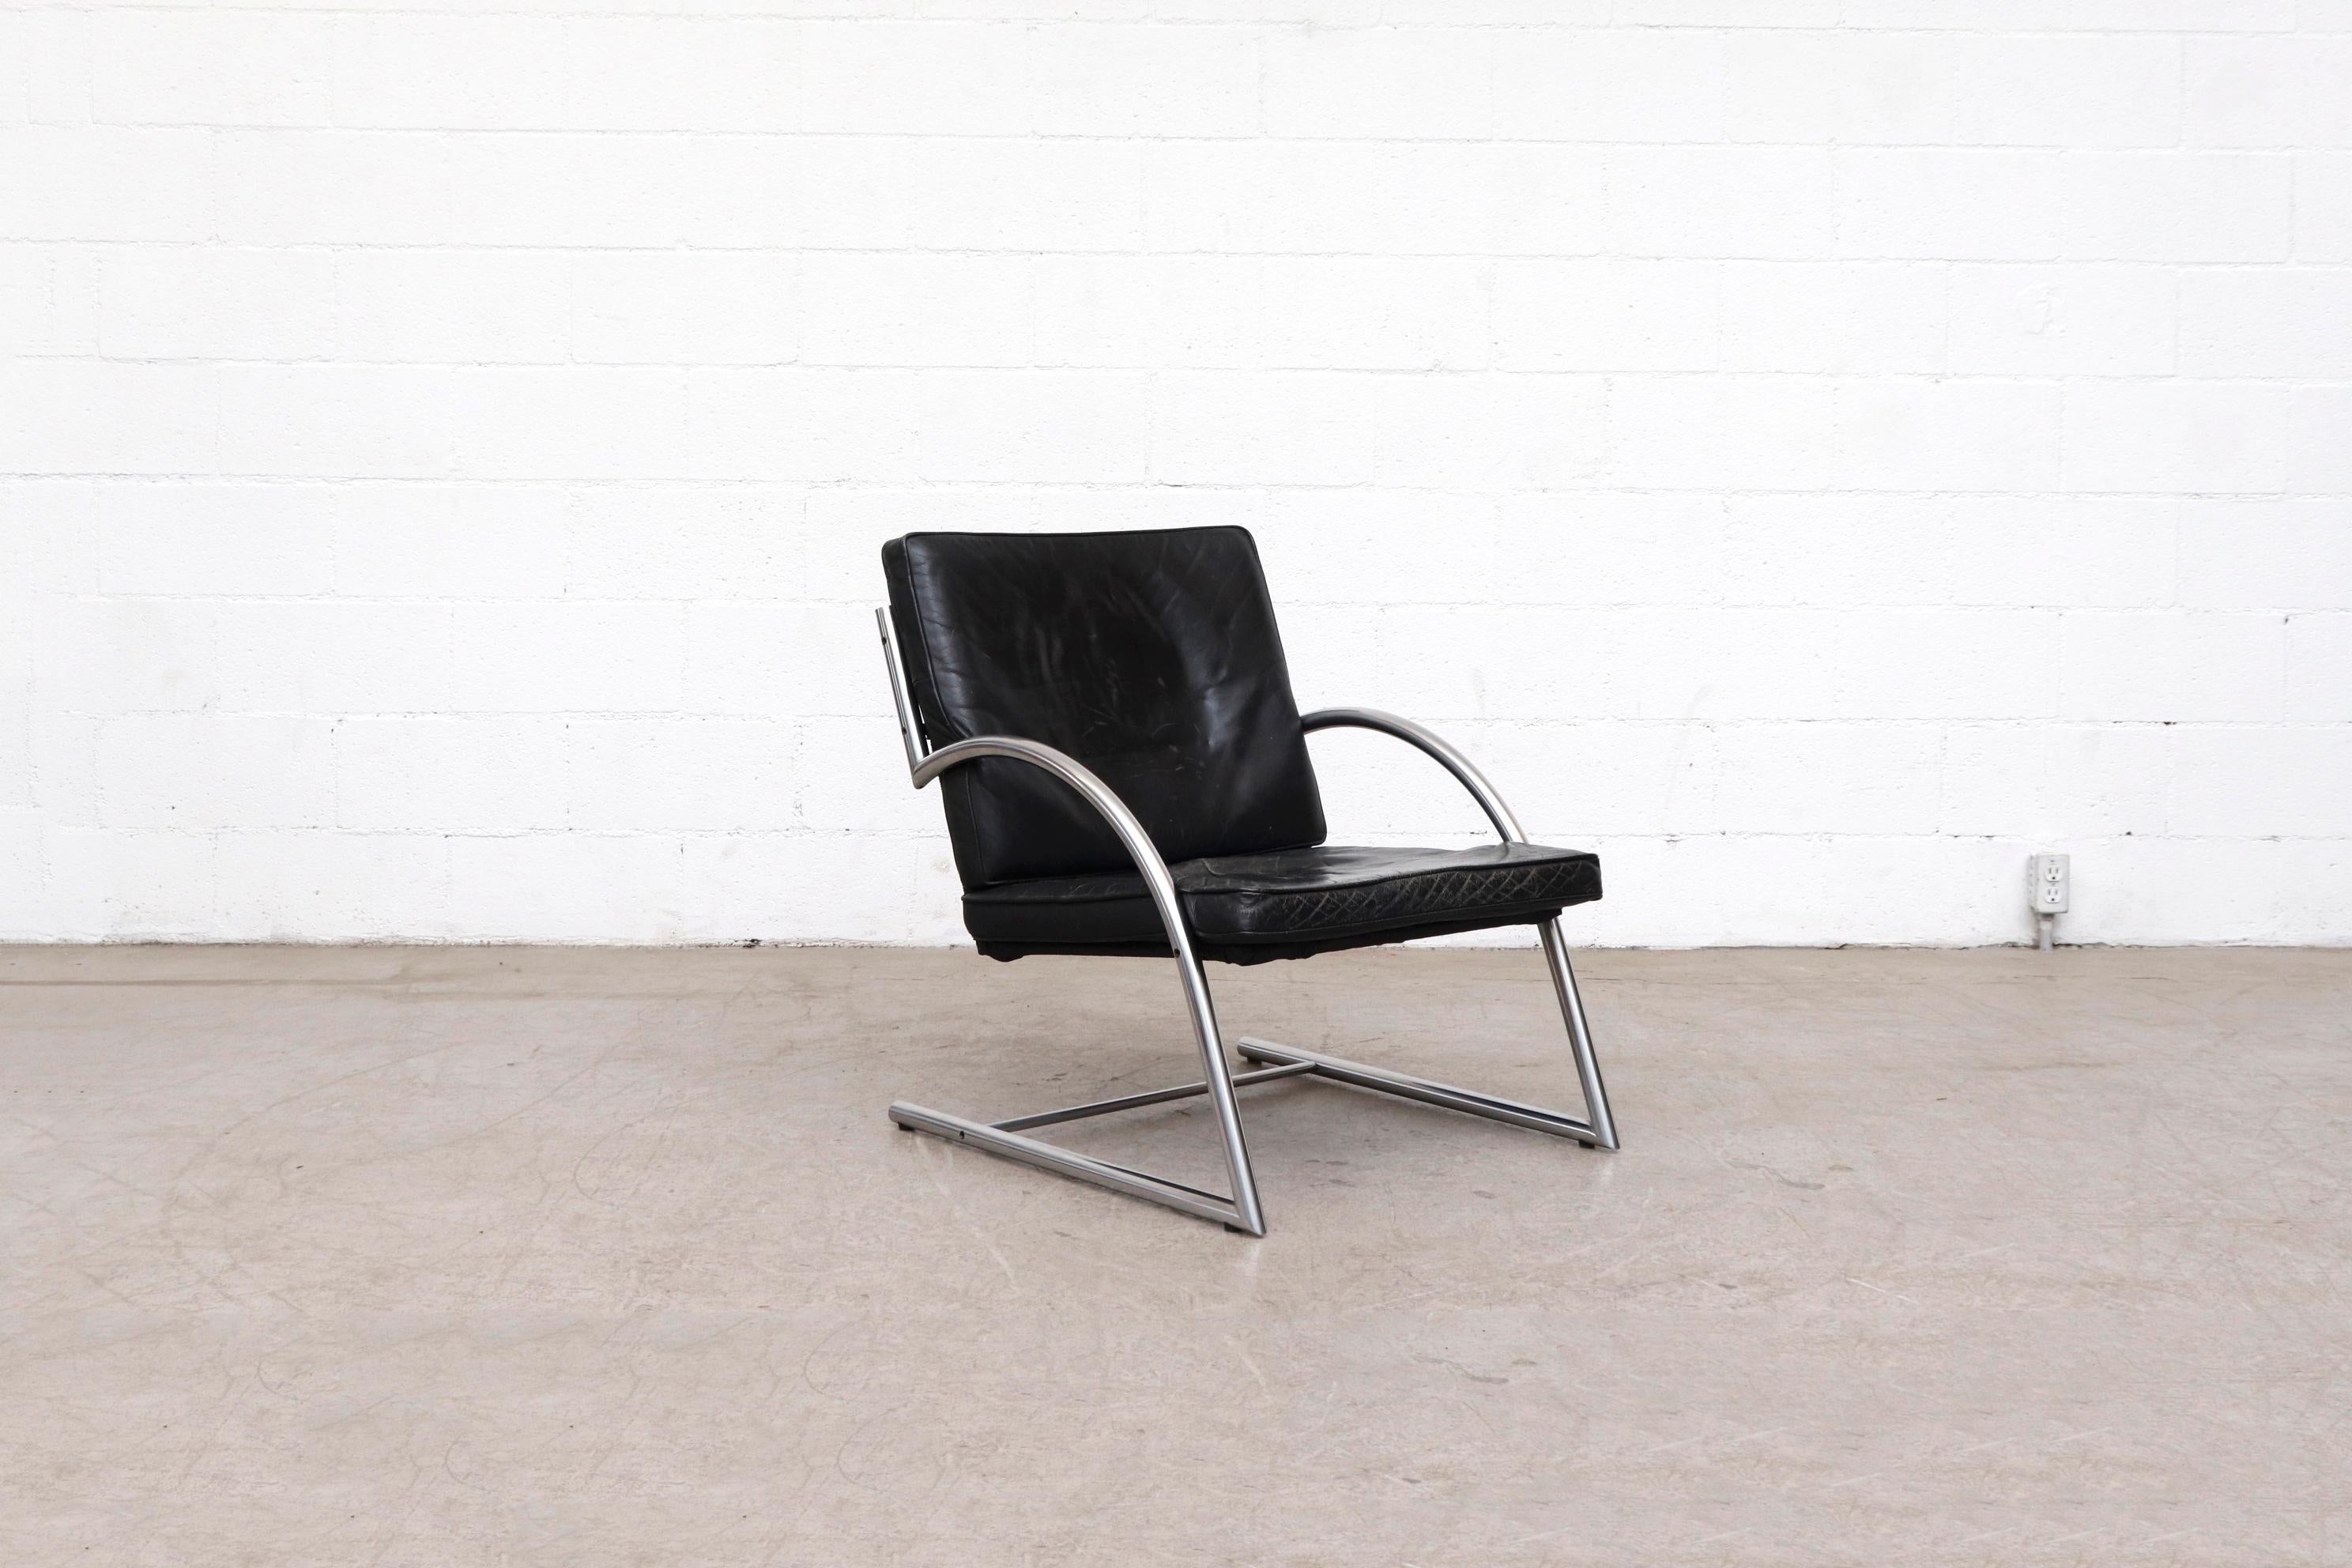 Mid-century black leather Des lounge chairs with tubular chrome frame. Woven black rattan back and seat with black leather cushions in original condition with visible wear. 